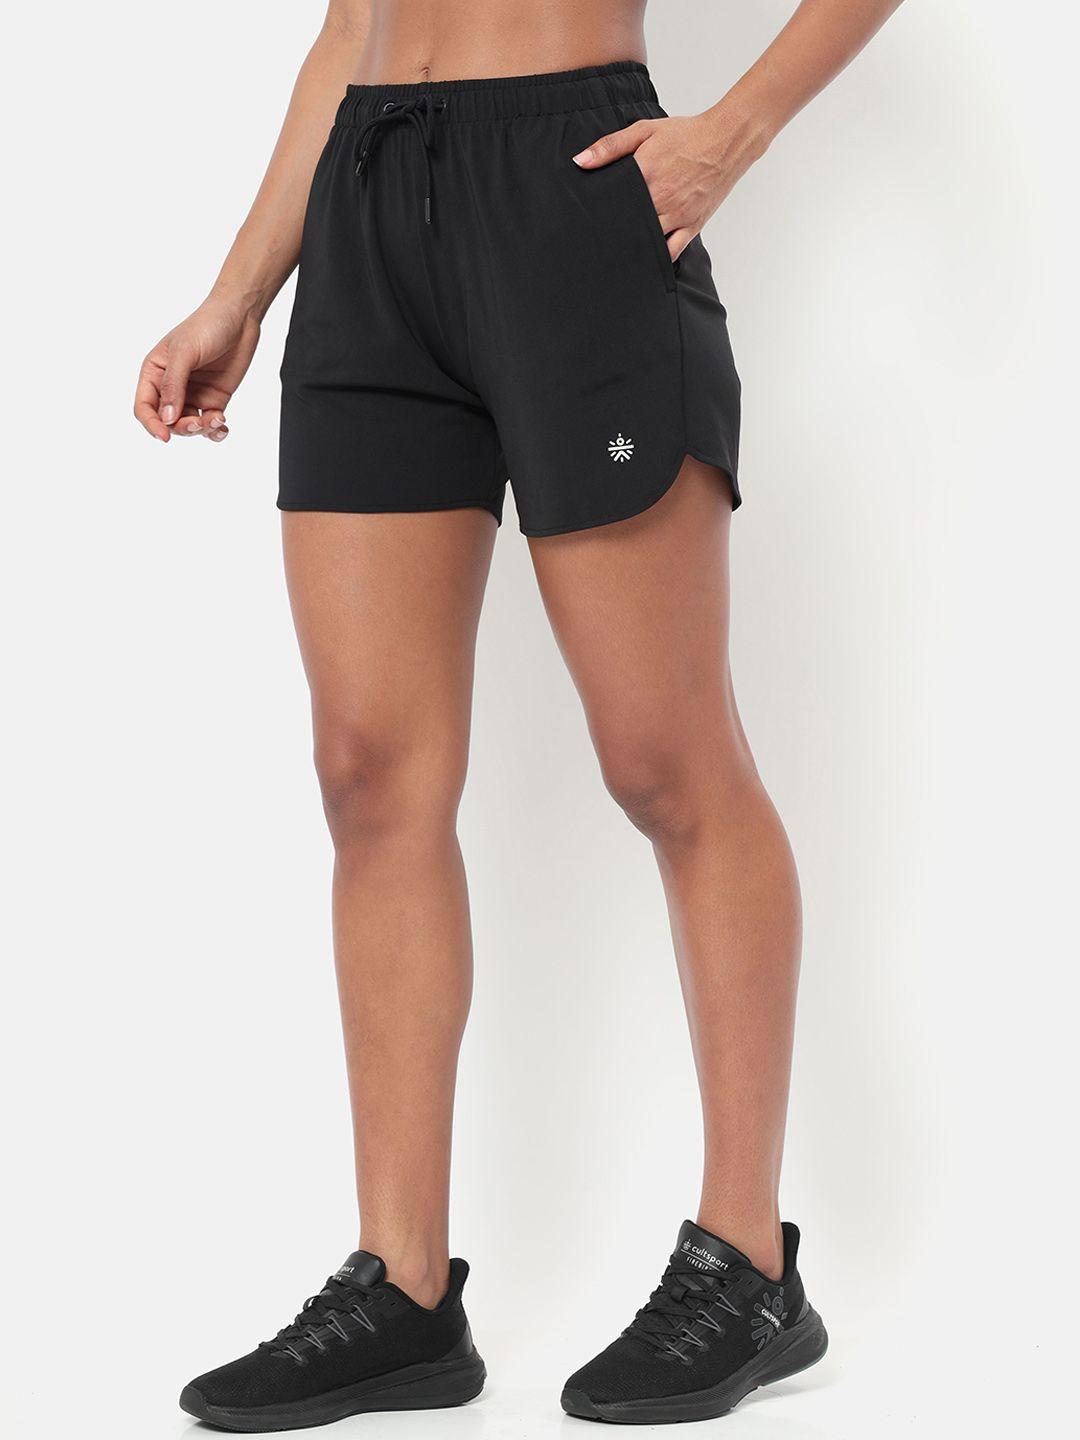 cultsport women mid-rise above knee active gym shorts